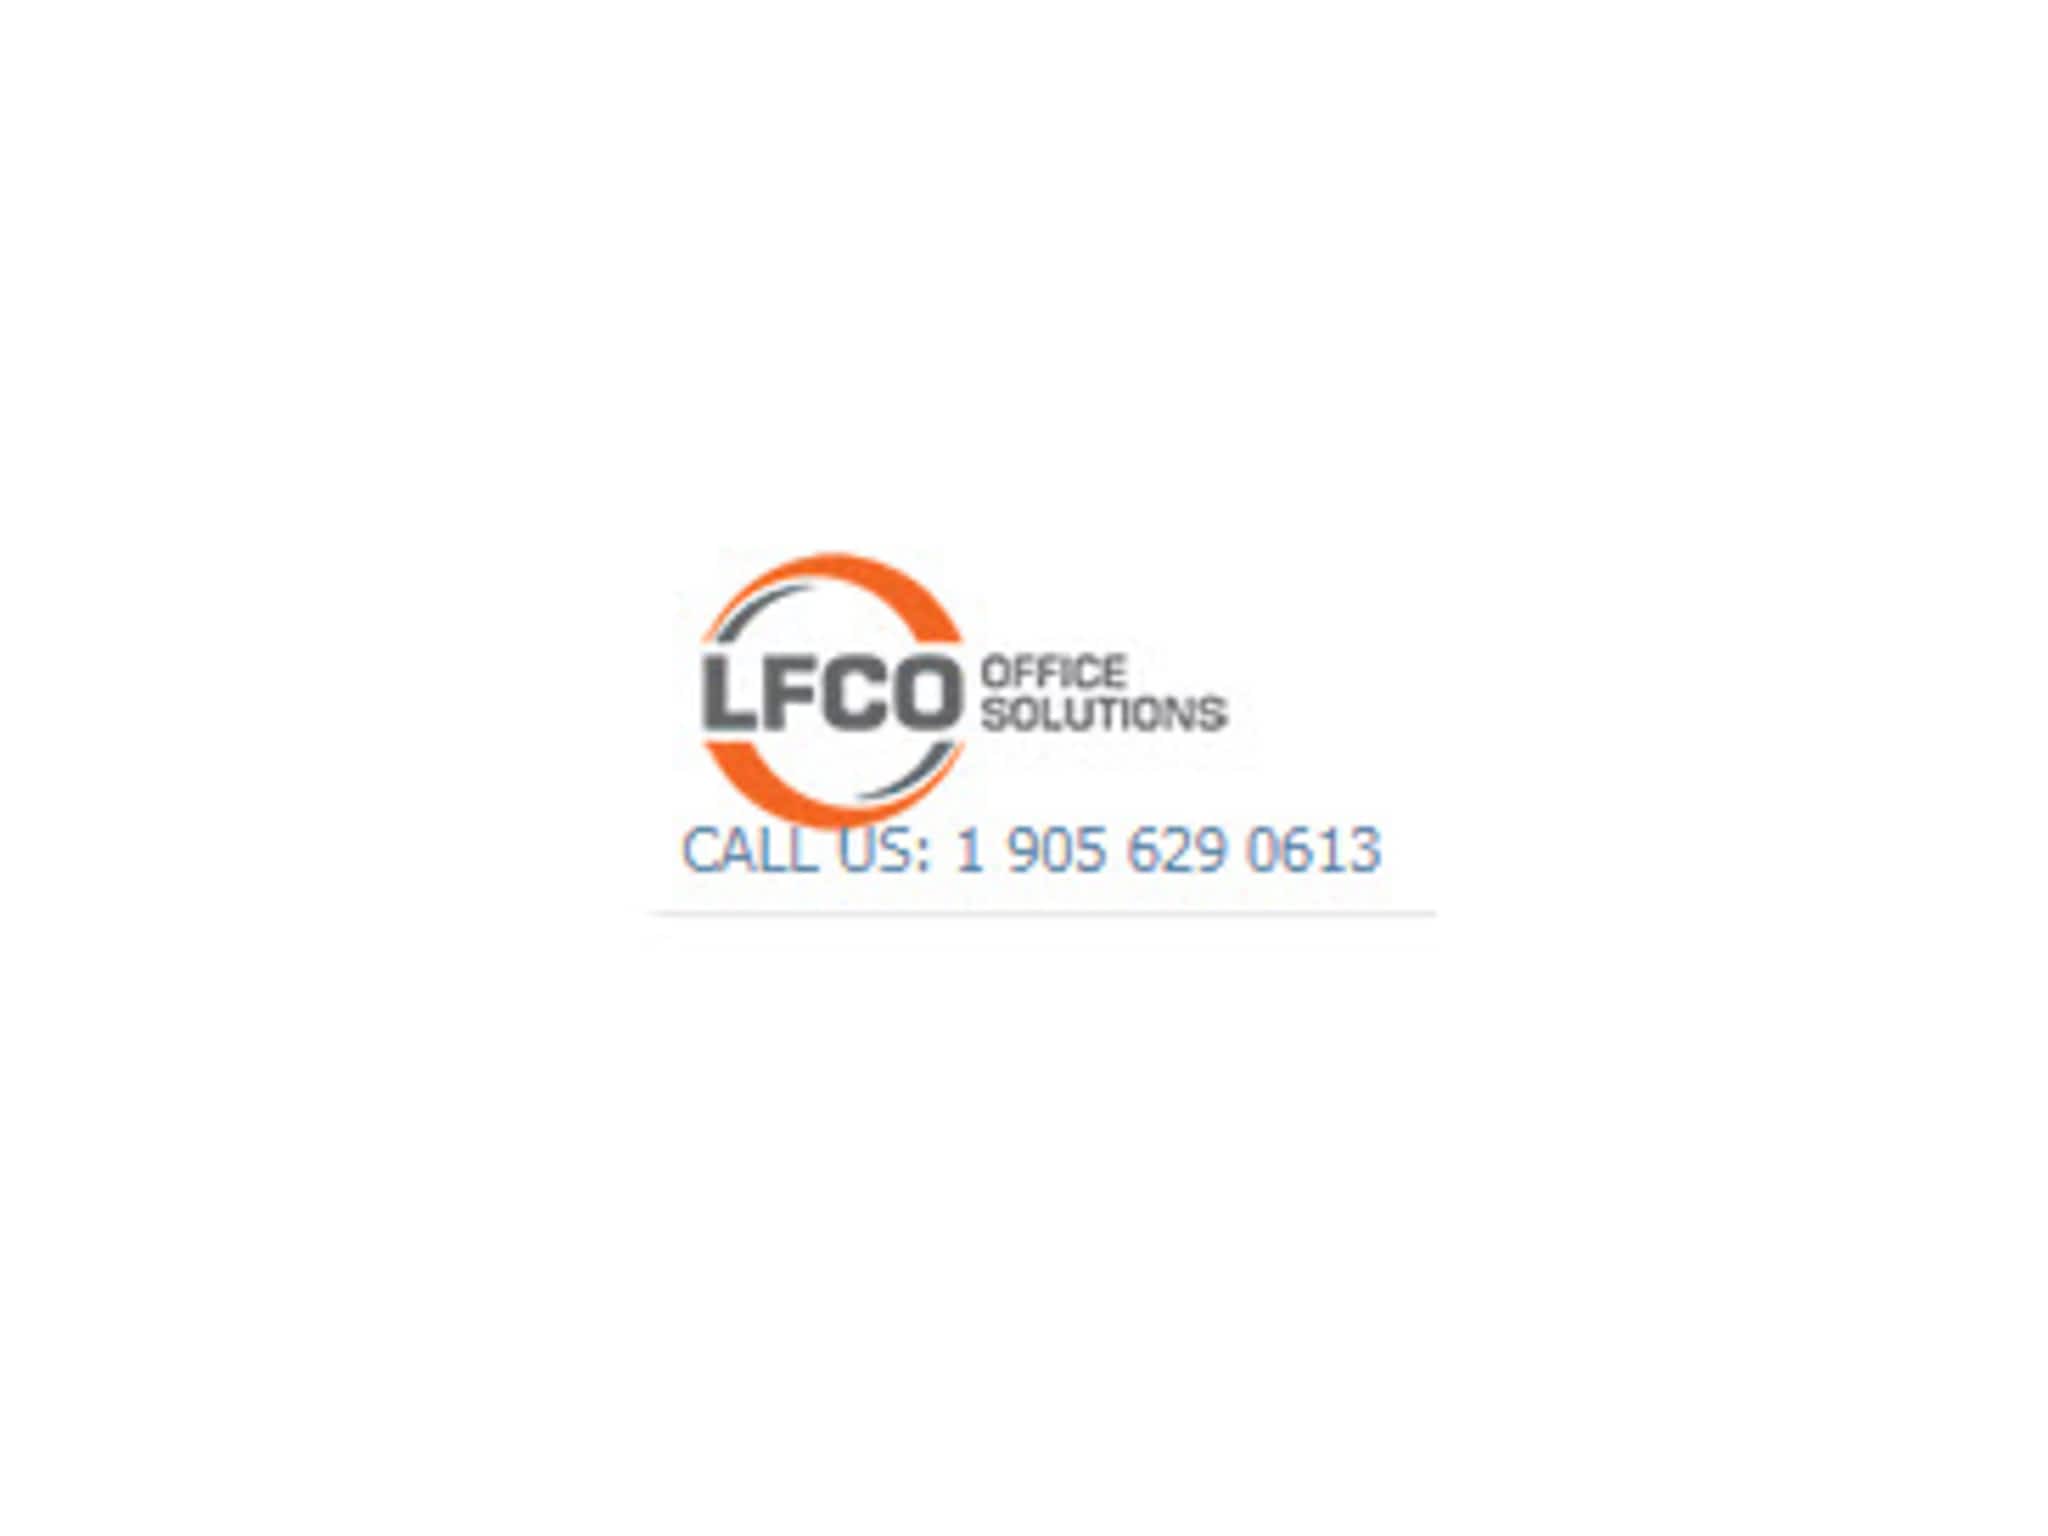 photo LFCO Office Solutions